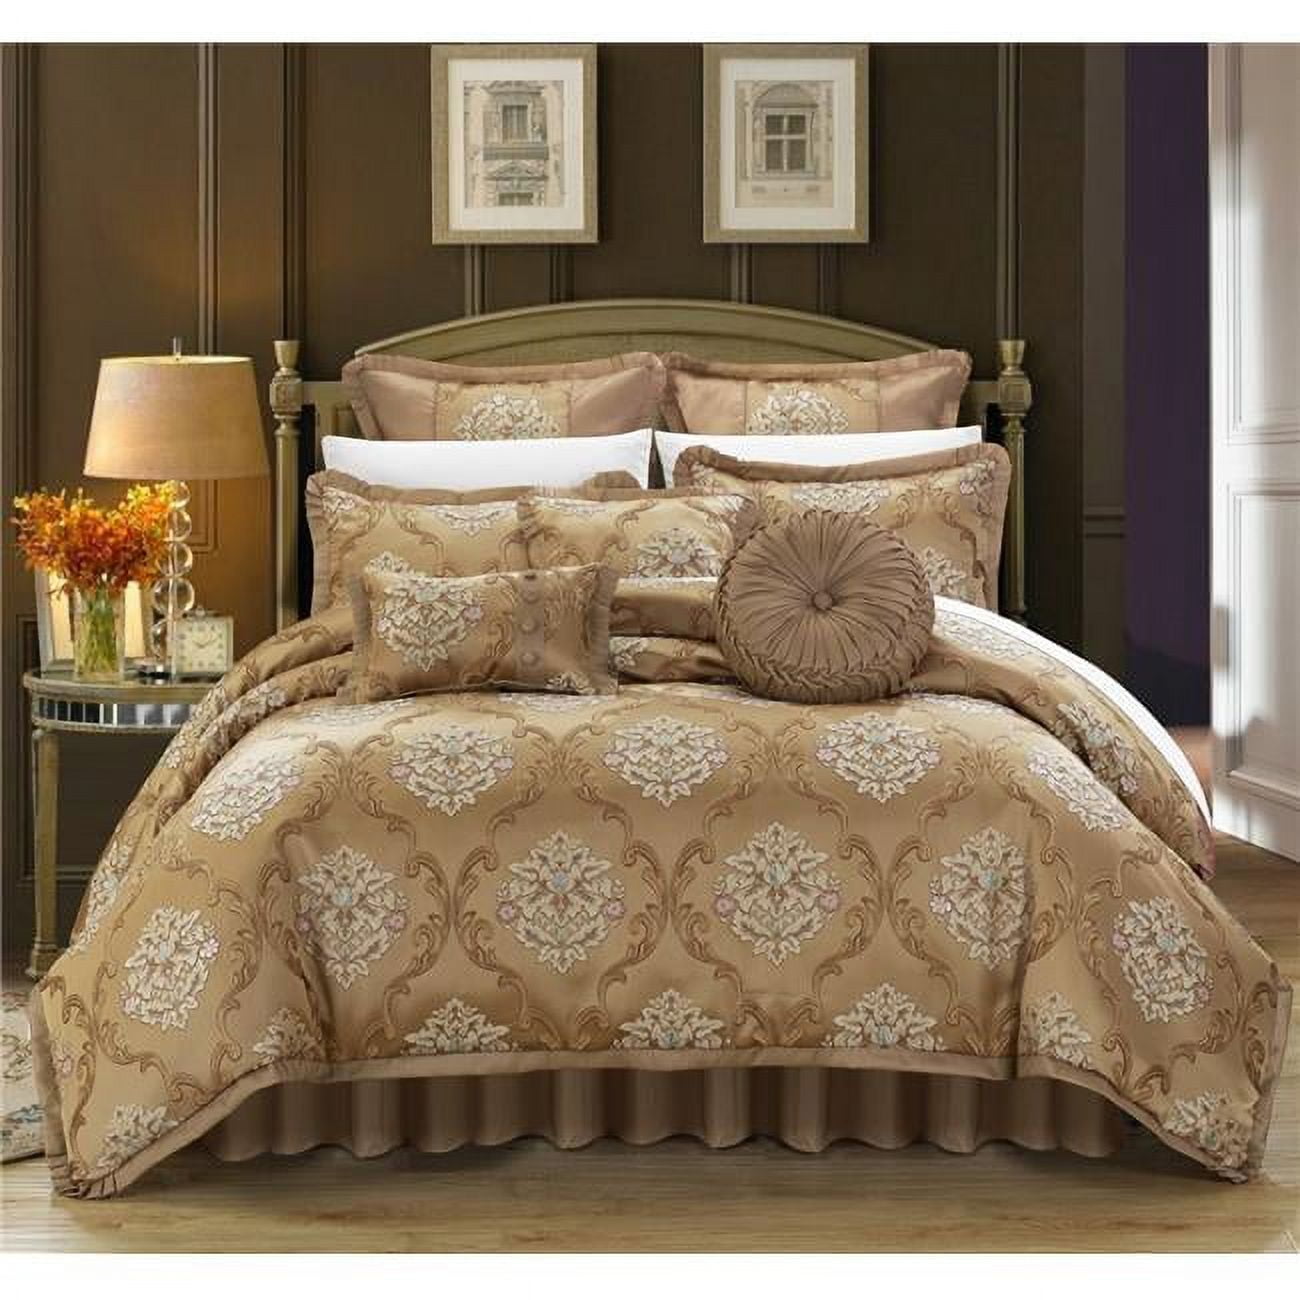 13 Piece Angelo Decorator Upholstery Quality Jacquard Scroll Fabric Complete Master Bedroom & Pillows Queen Bed In A Bag Comforter Set, Gold